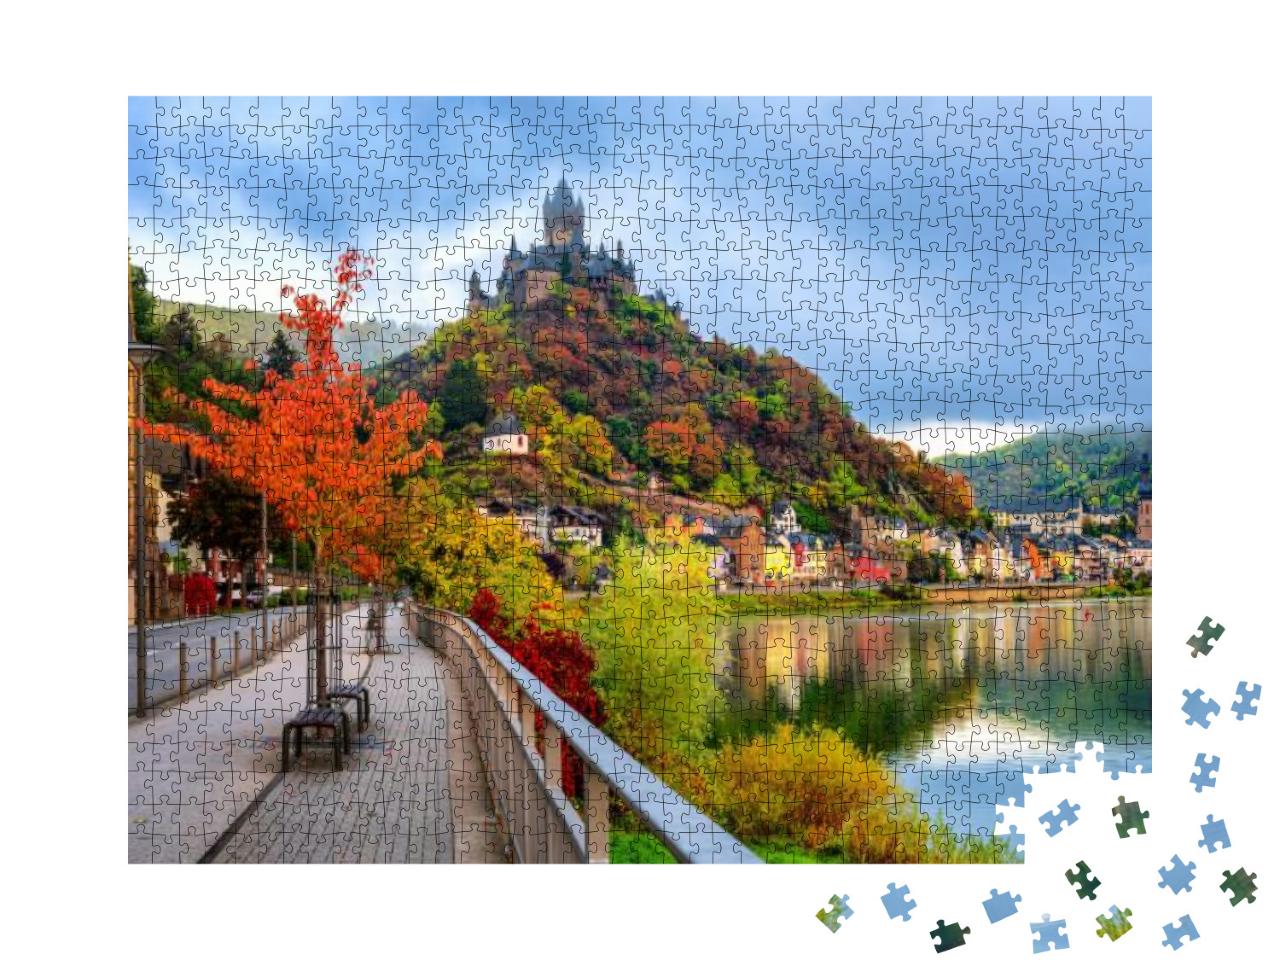 Cochem Historical Romantic Town on Moselle River Valley... Jigsaw Puzzle with 1000 pieces